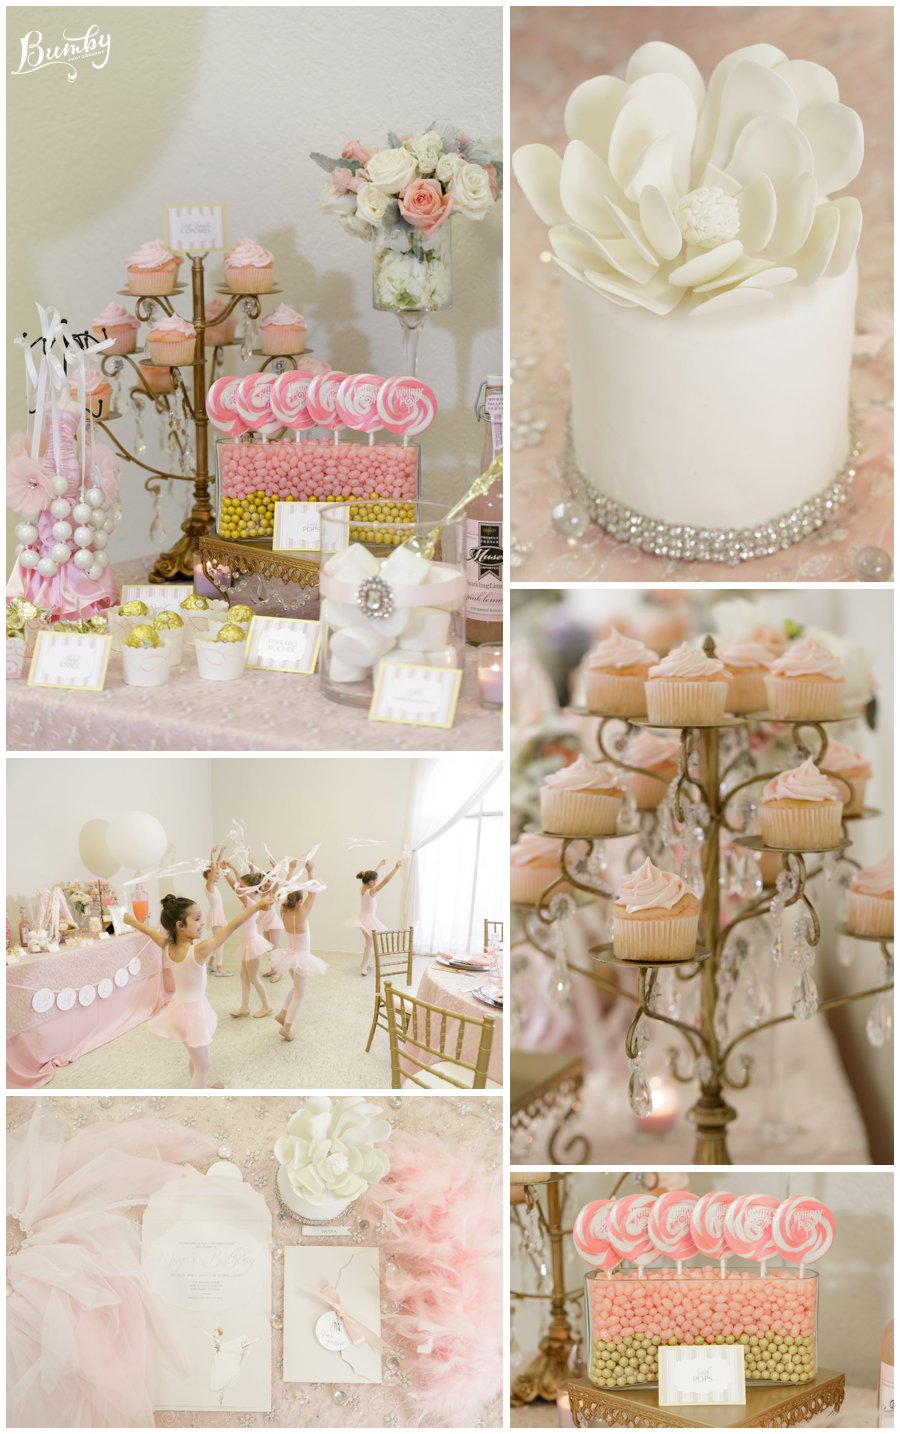 Ballet_Themed_Party_Tasteful_Tuesday_Bumby_Photography